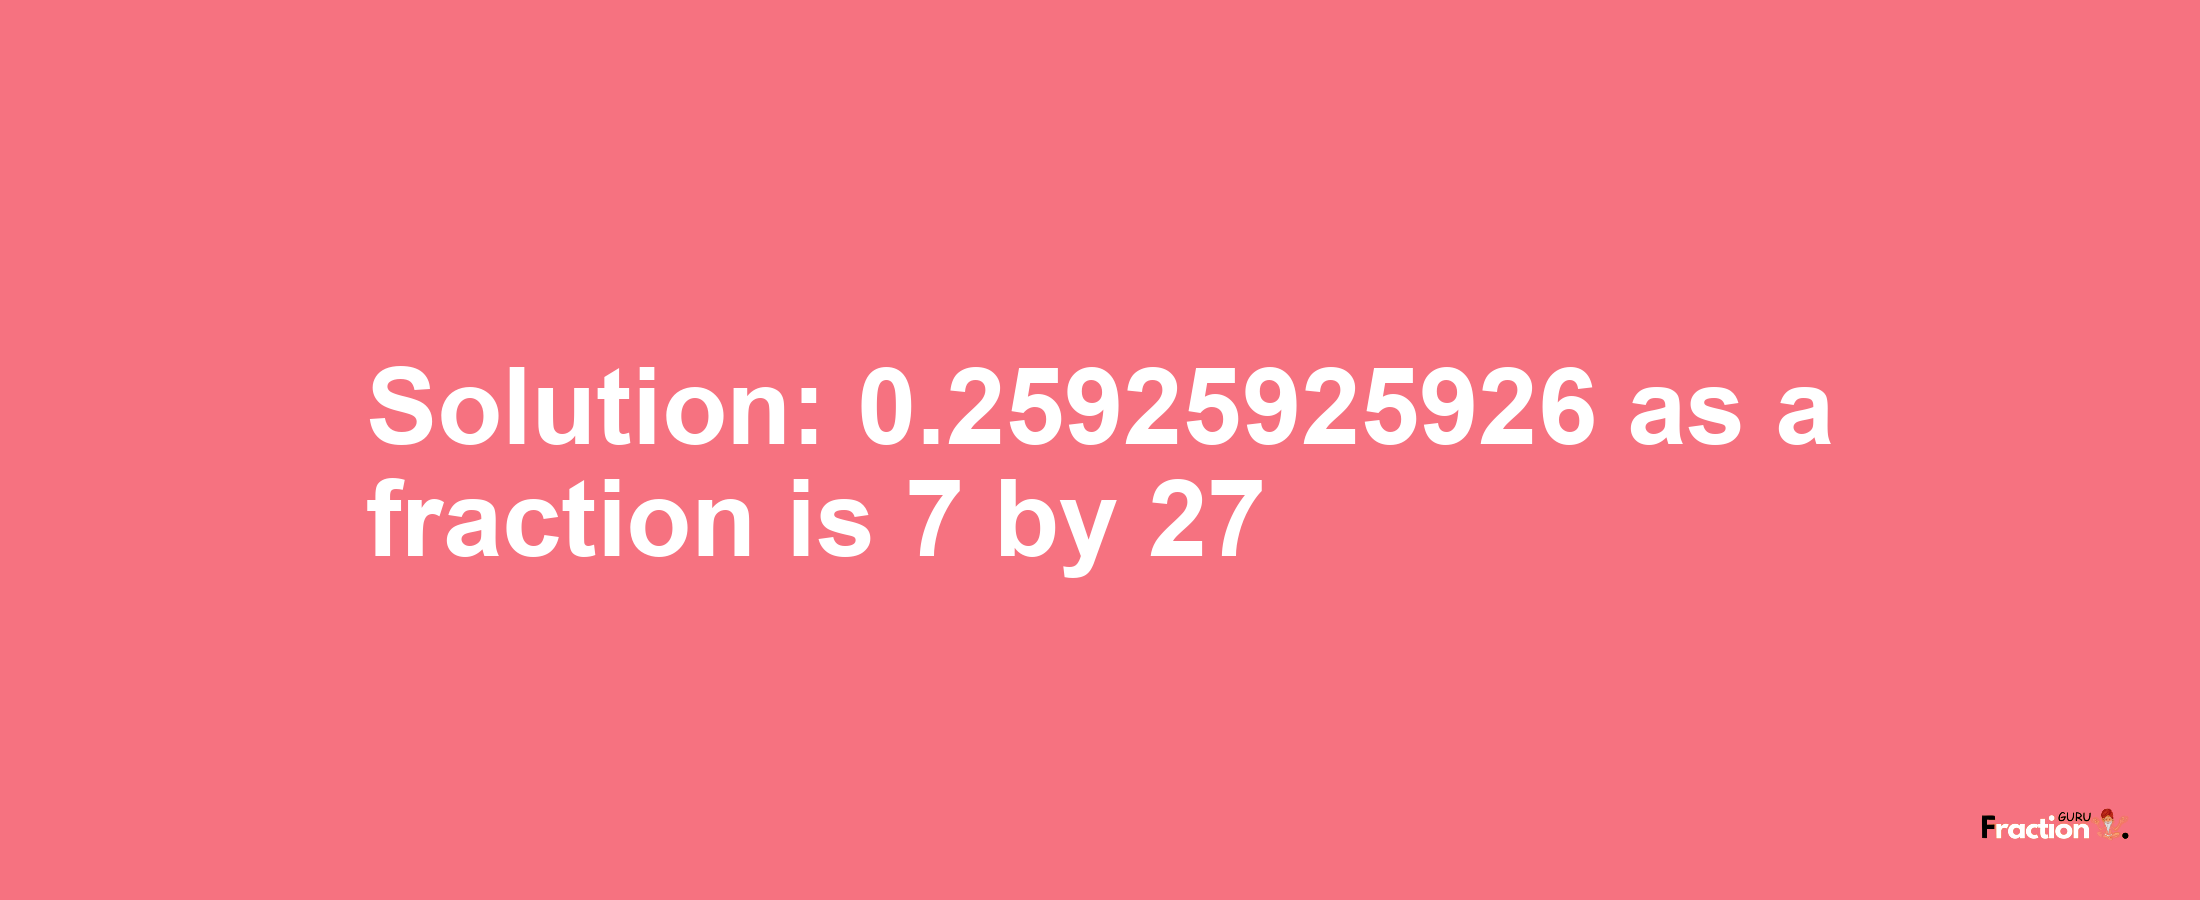 Solution:0.25925925926 as a fraction is 7/27